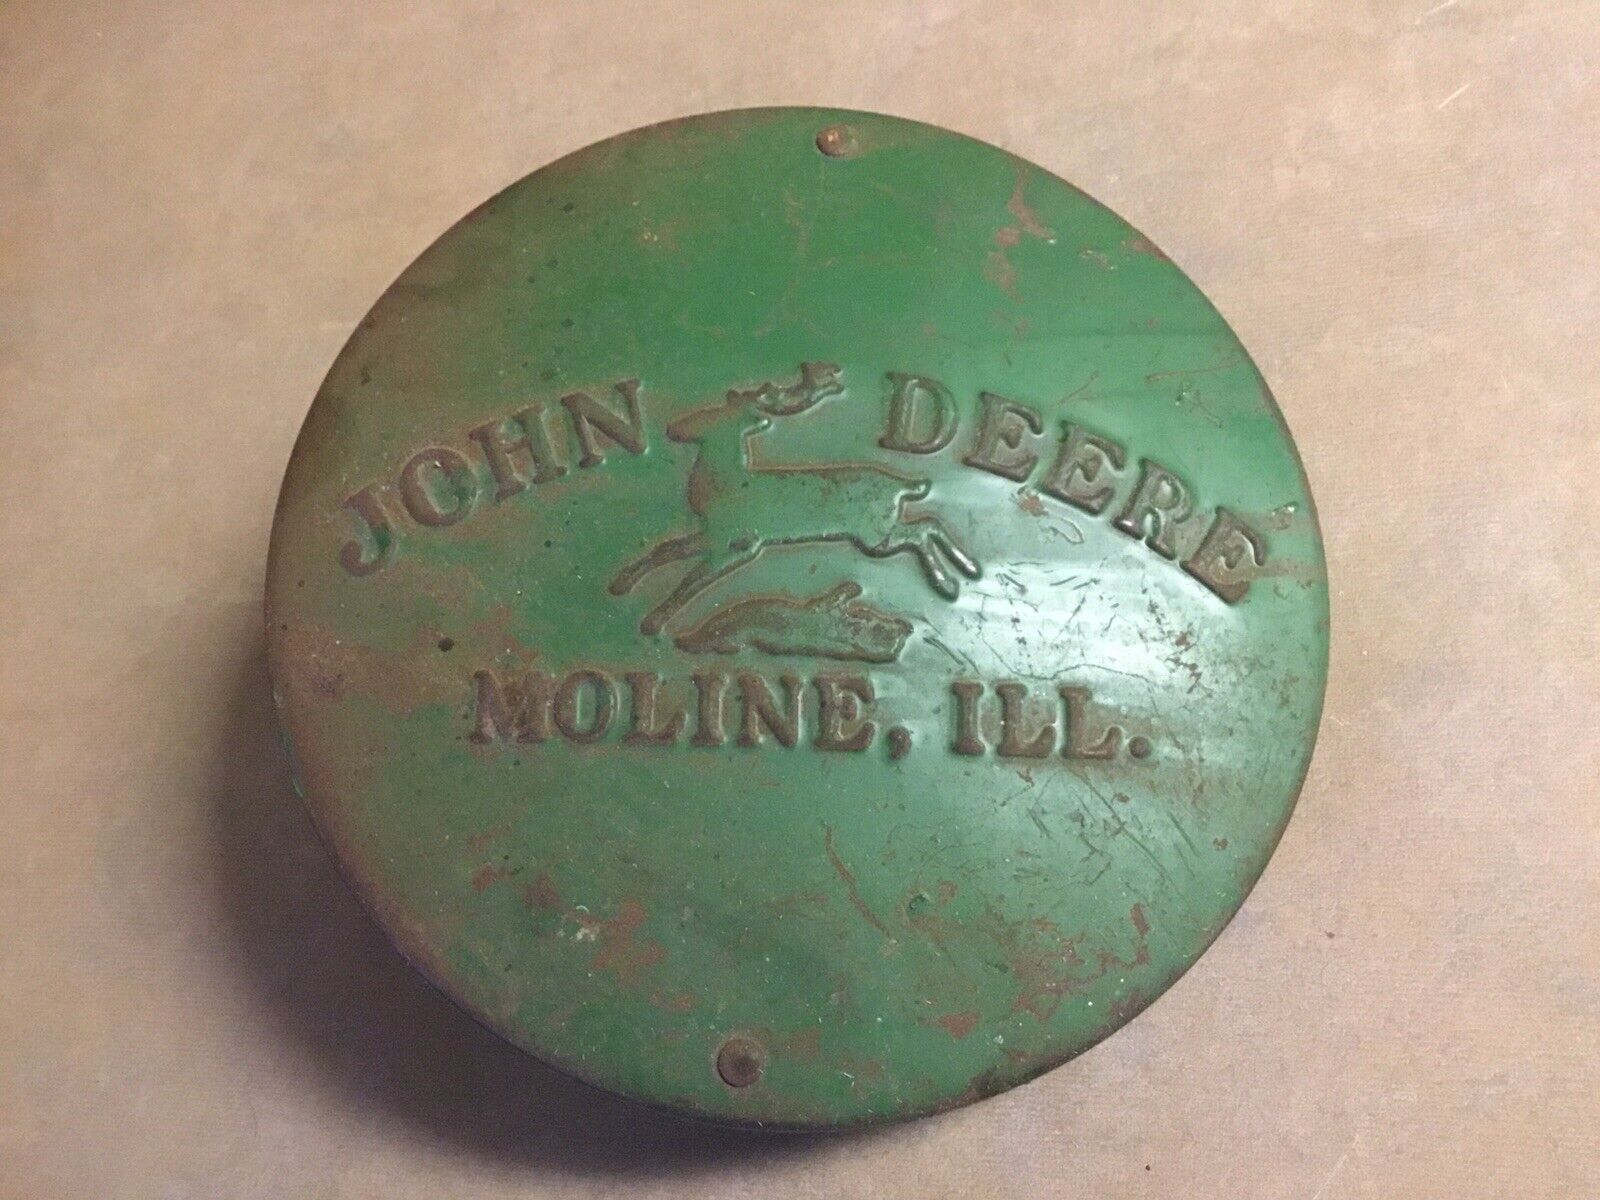 Vintage John Deere seed cover planter cover Farm Tractor